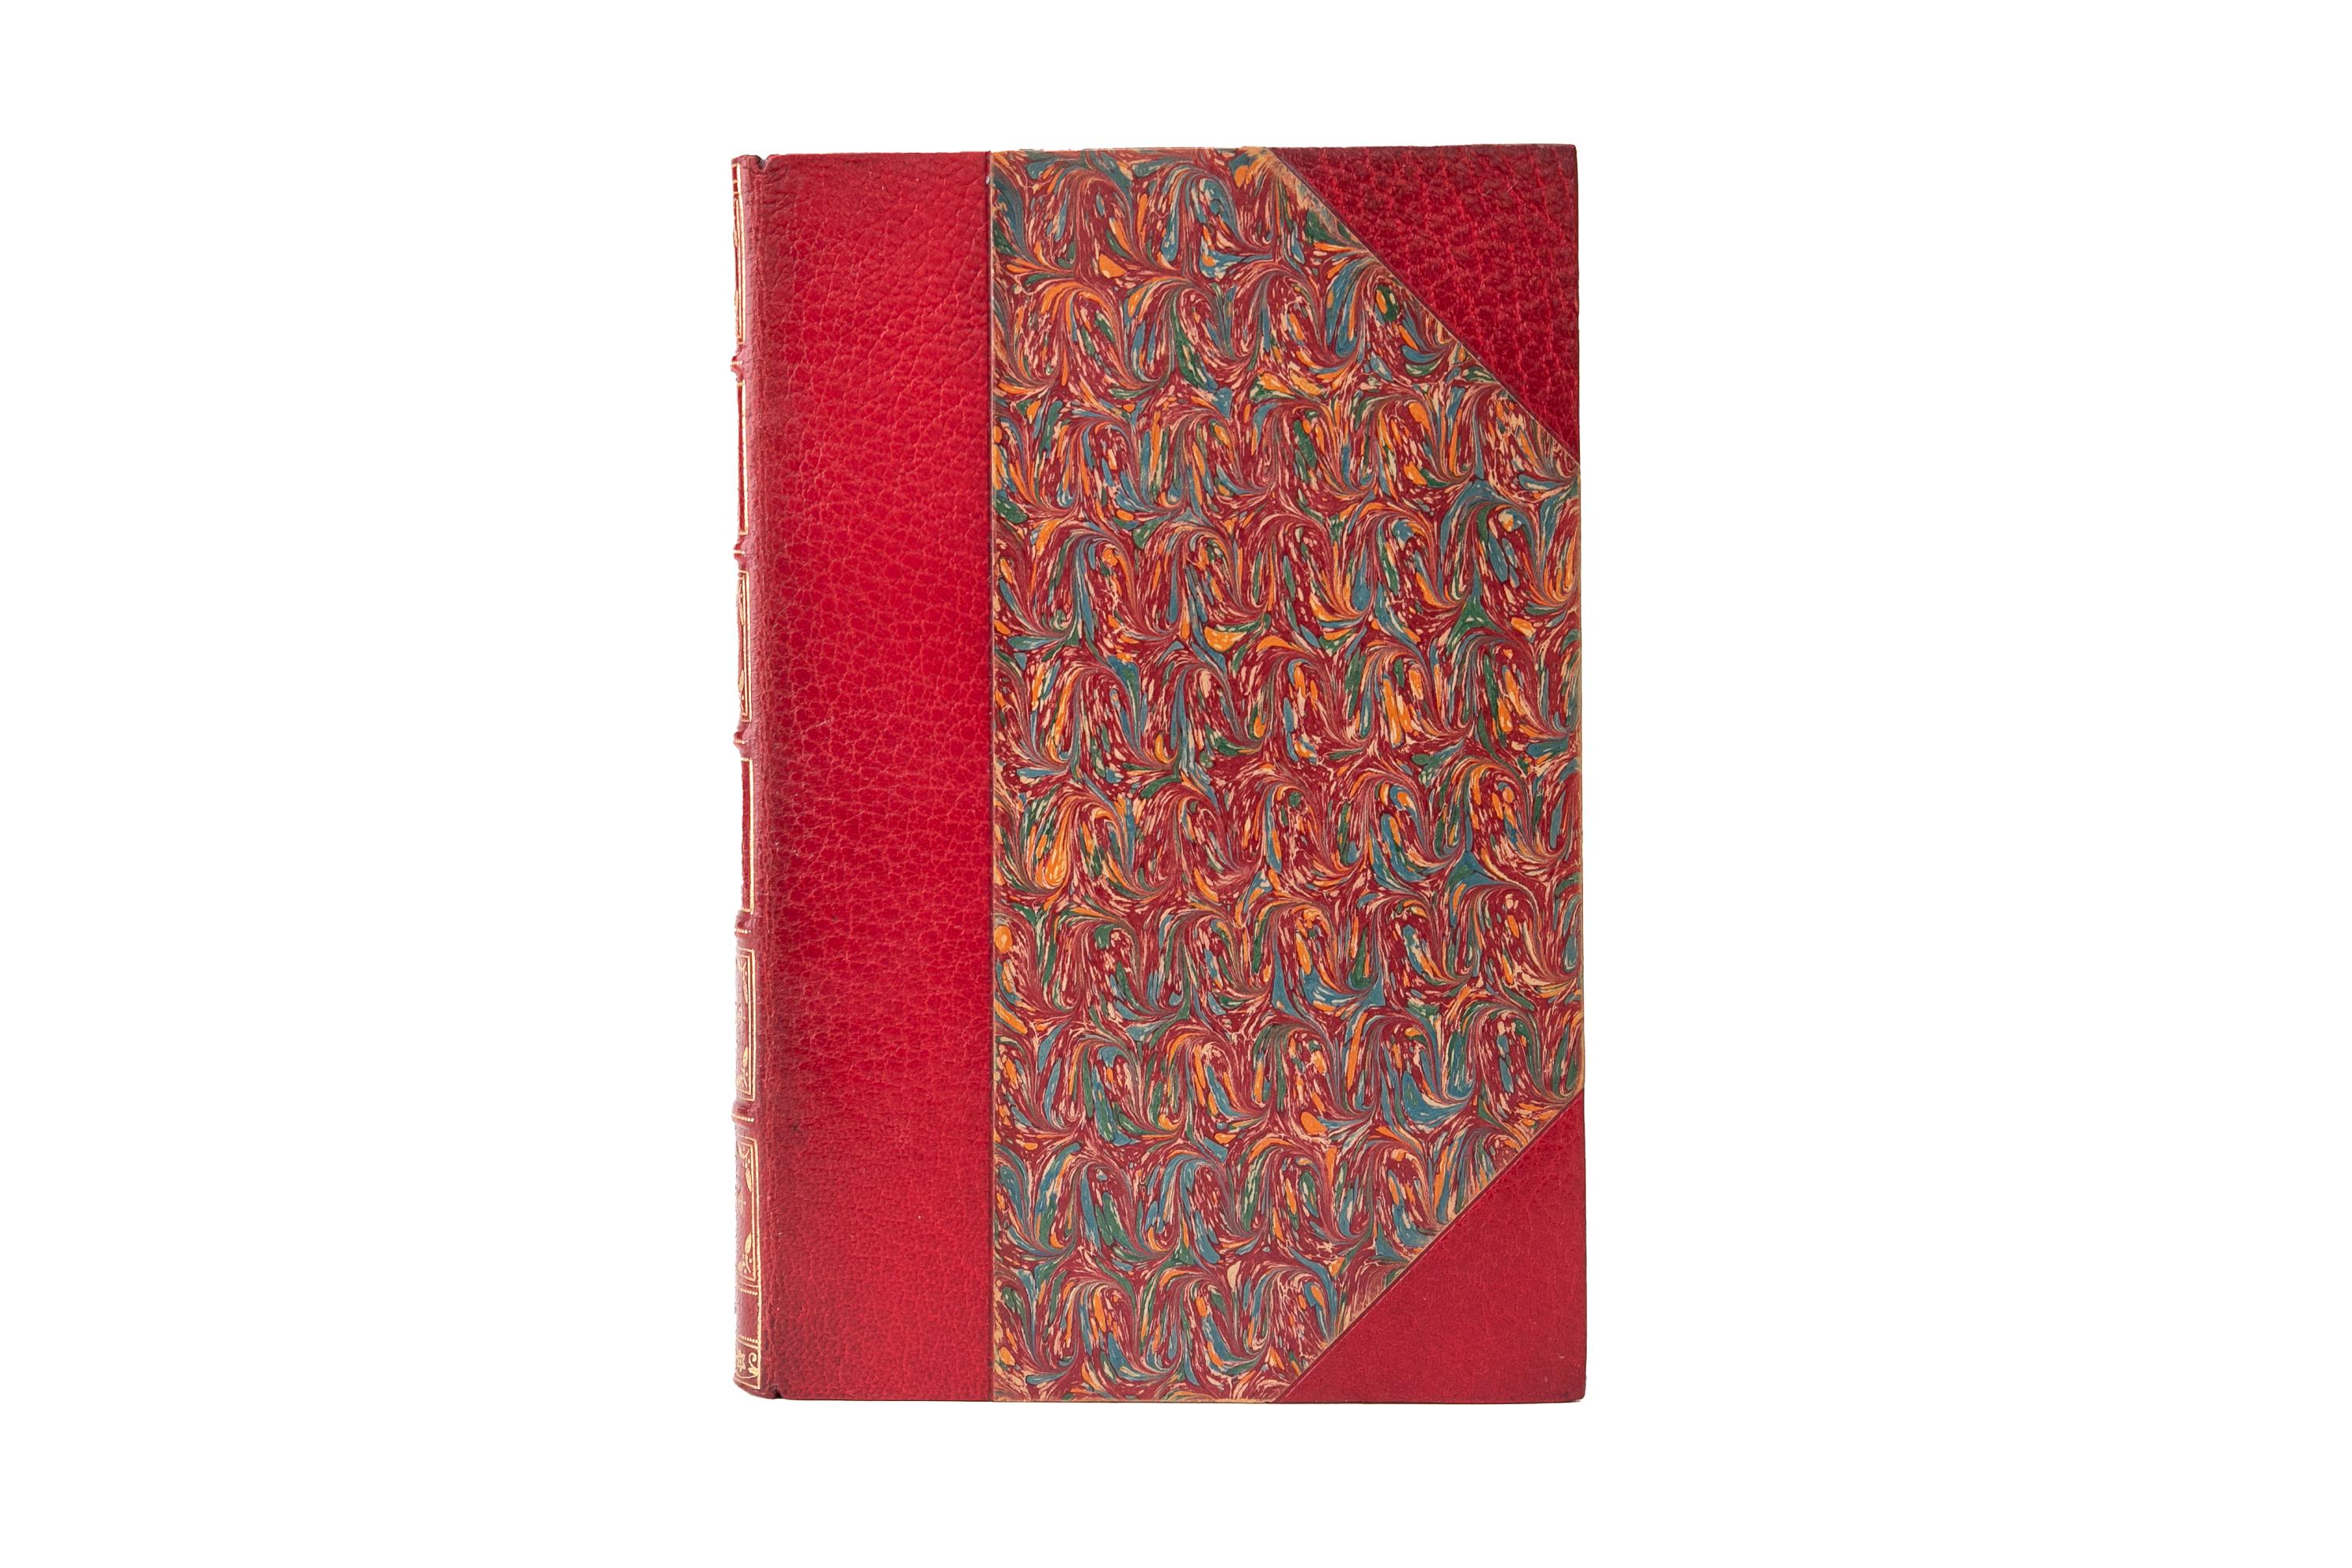 20 Volumes. R.L. Stevenson, Complete Works. Bound by Blackwell in 3/4 red morocco and marbled boards. Raised band spine with ornate gilt-tooling. Top edges are gilt with marbled endpapers. Frontispieces. New York: Charles Scribner's Sons, 1896.